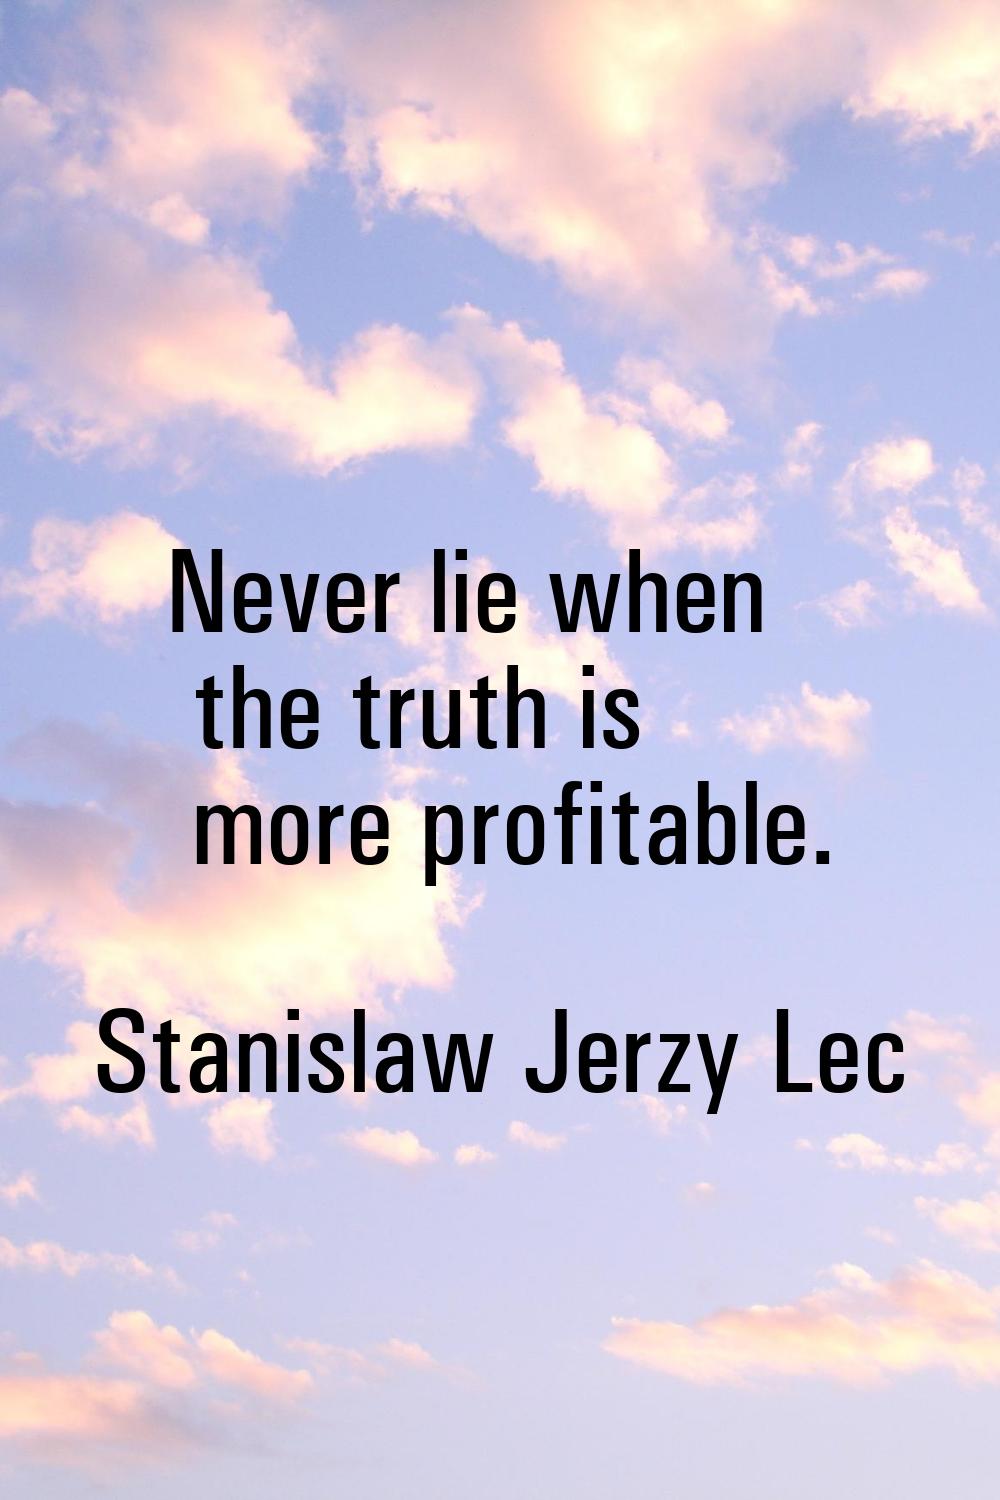 Never lie when the truth is more profitable.